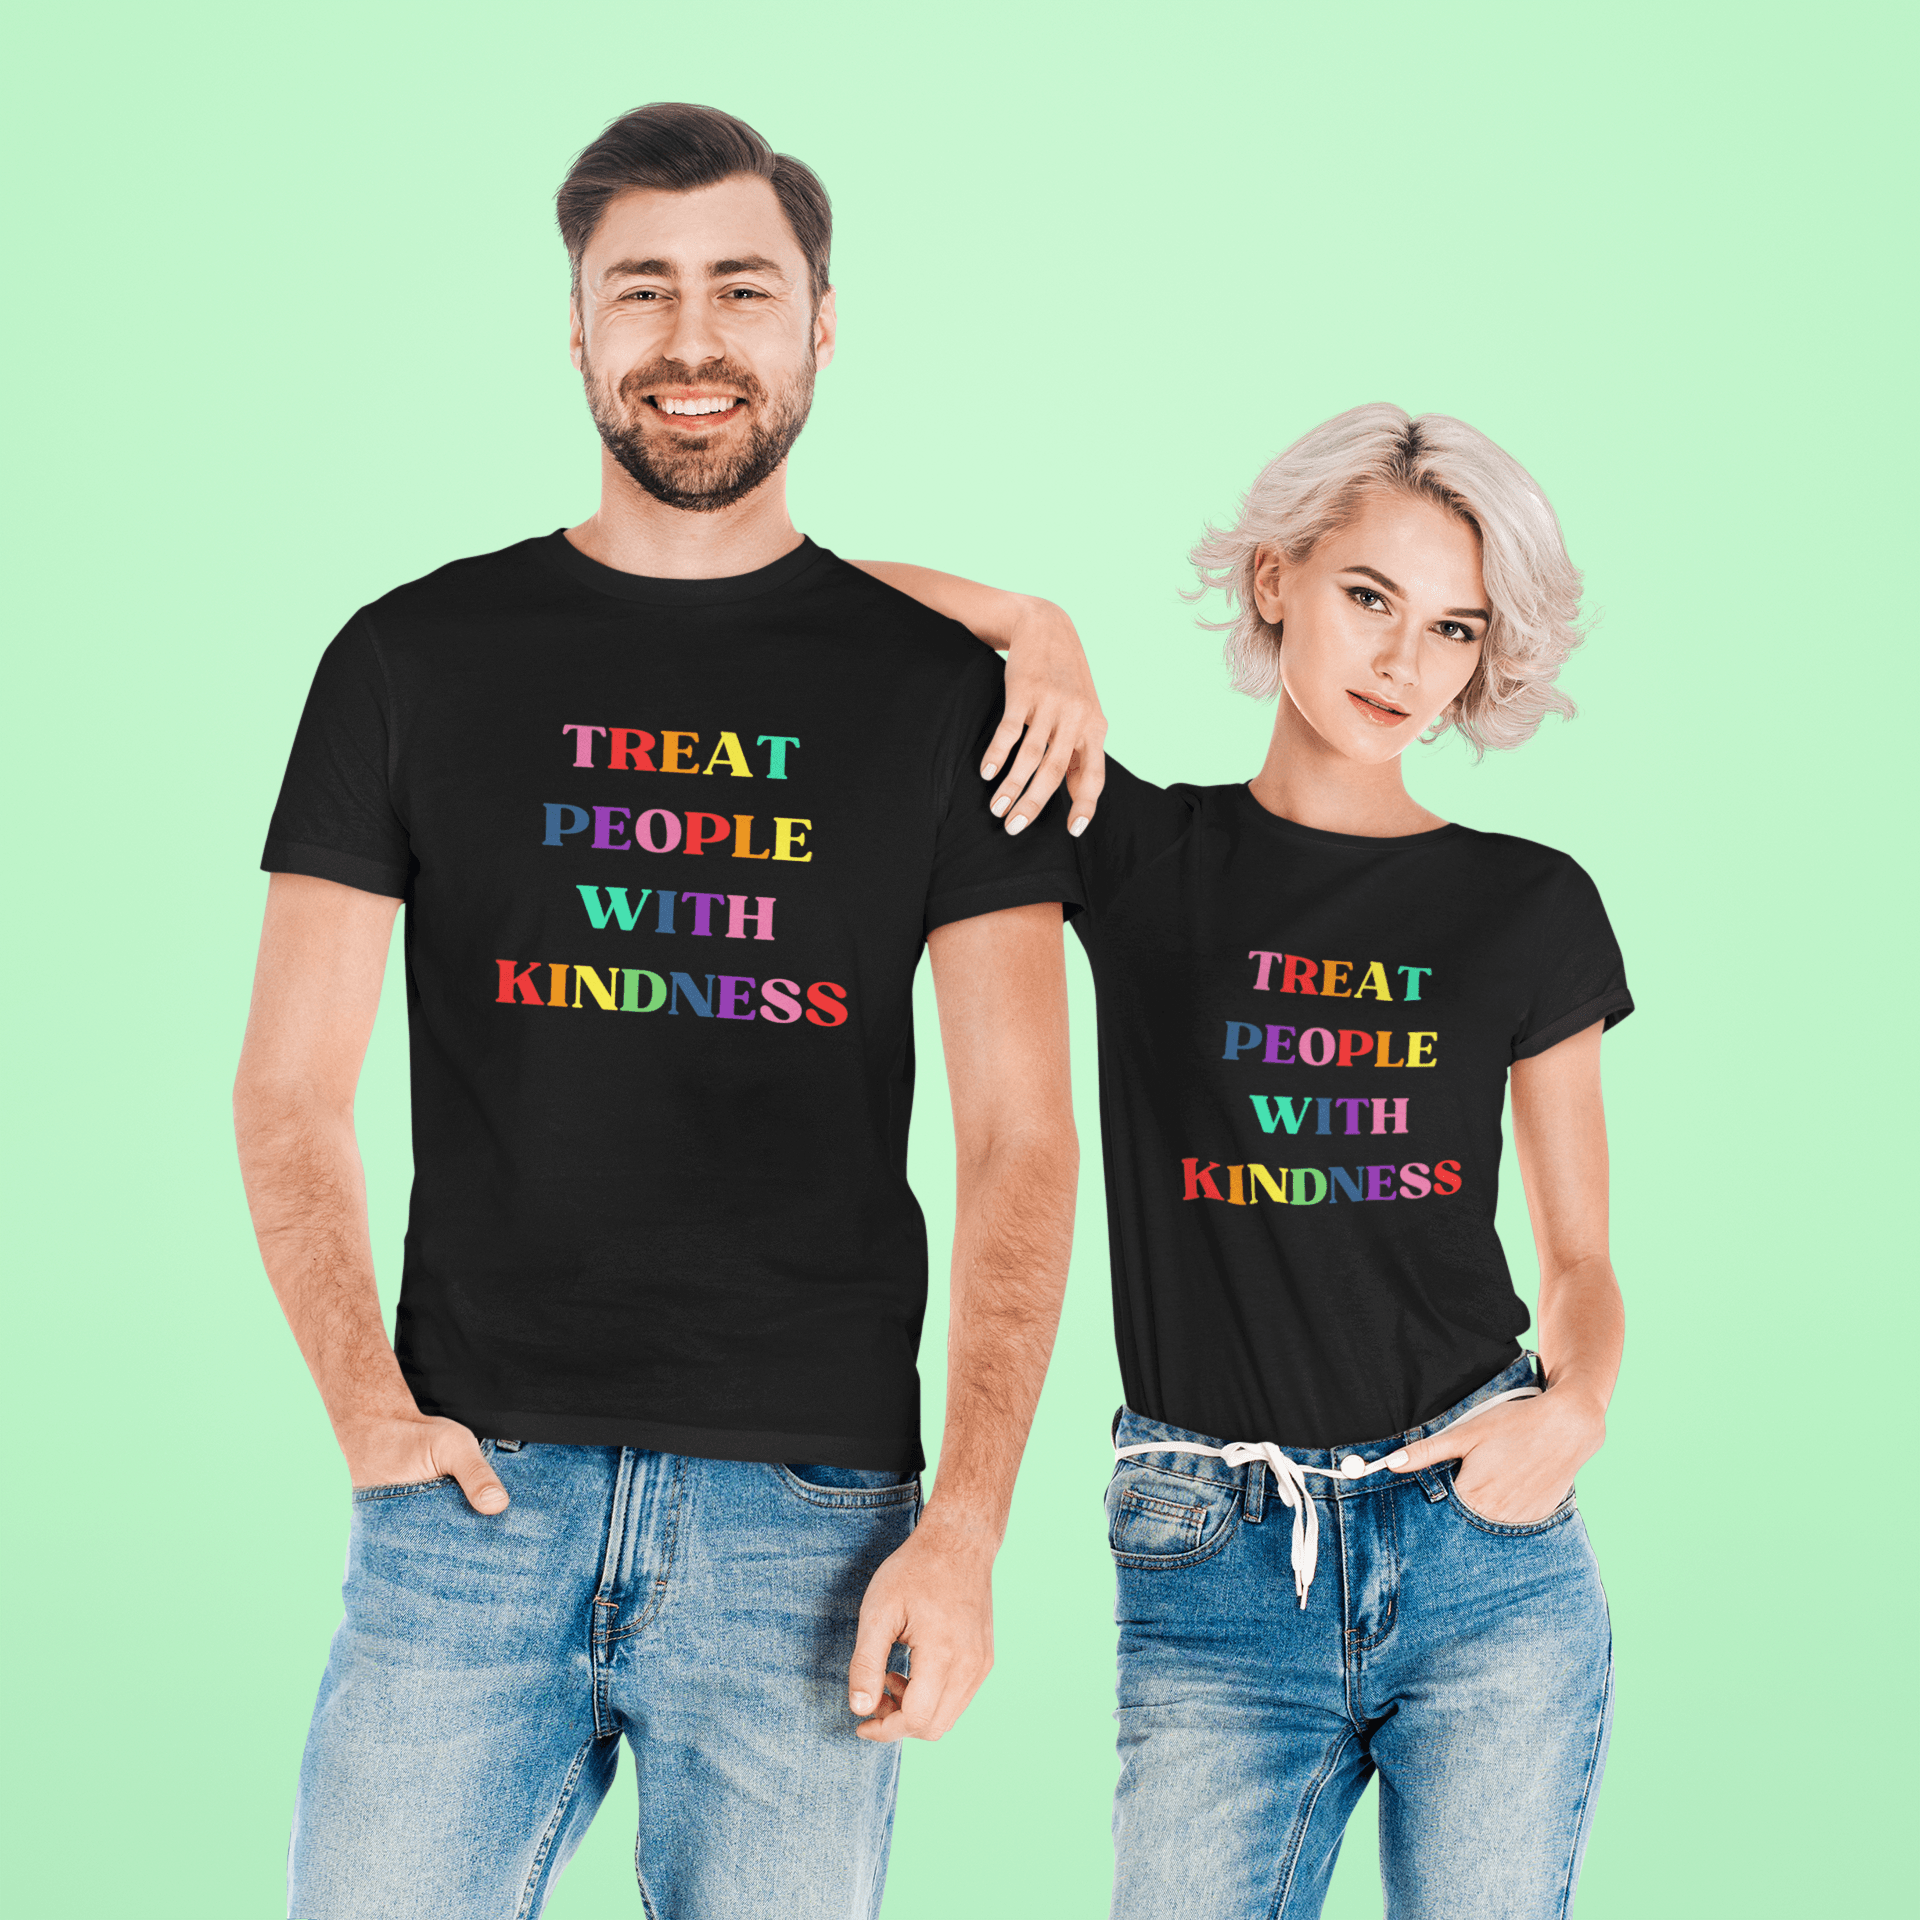 Treat People With Kindness Printed Unisex T-shirt - The Kindness Cause